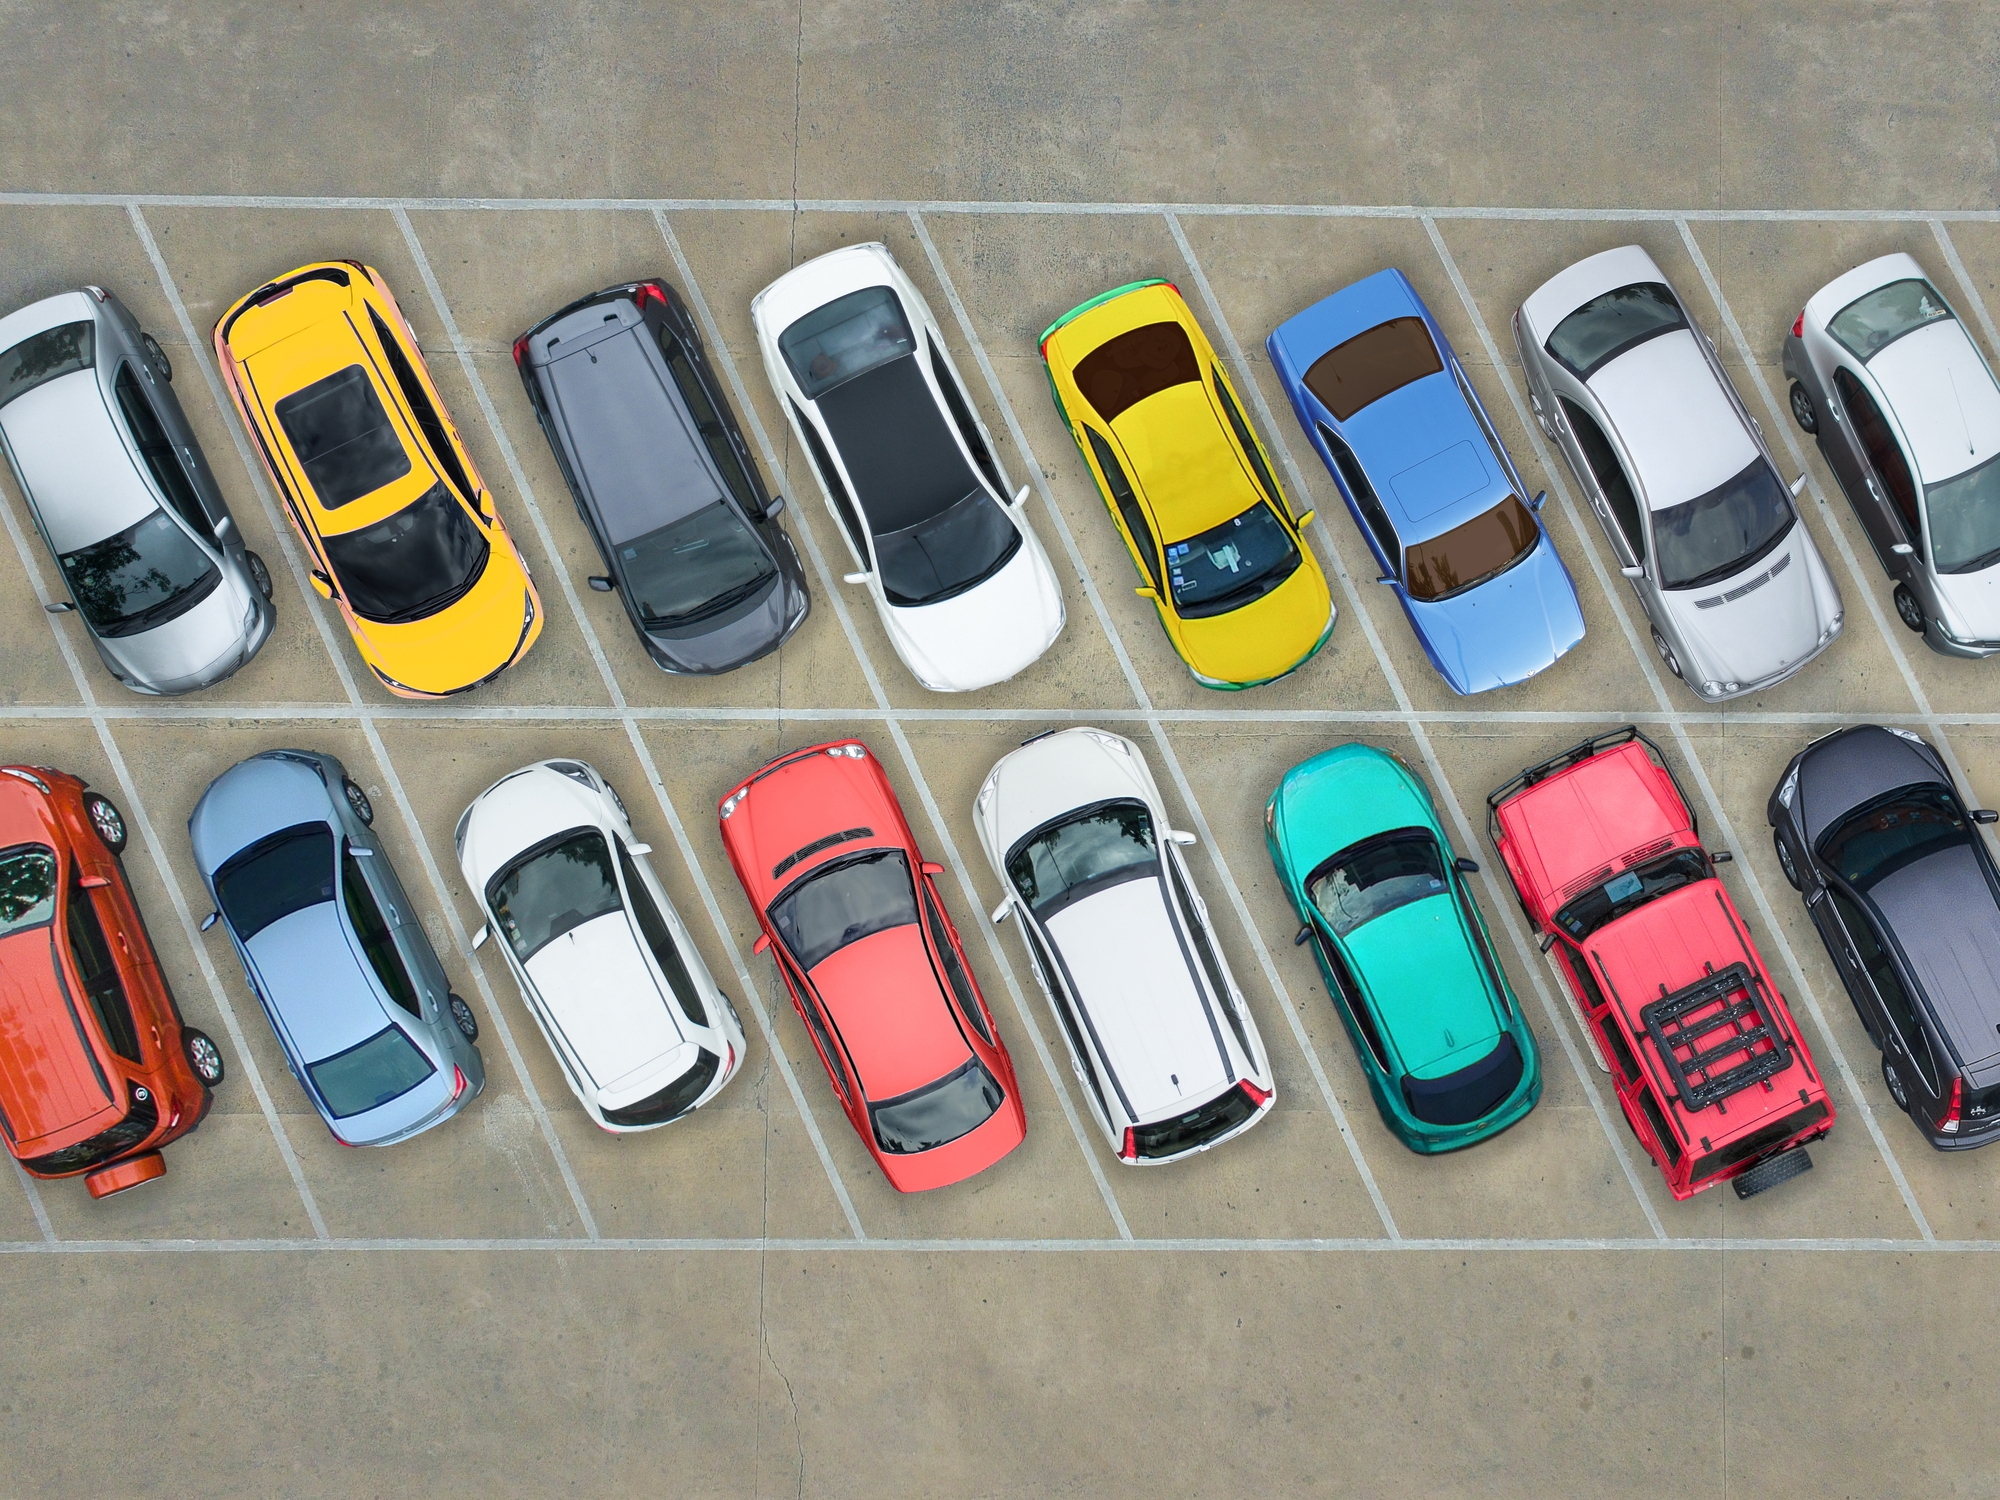 Sai hopes to develop a mobile app dubbed InstaPark that can display the real-time grid layout of empty and occupied parking spots using a phone’s GPS.